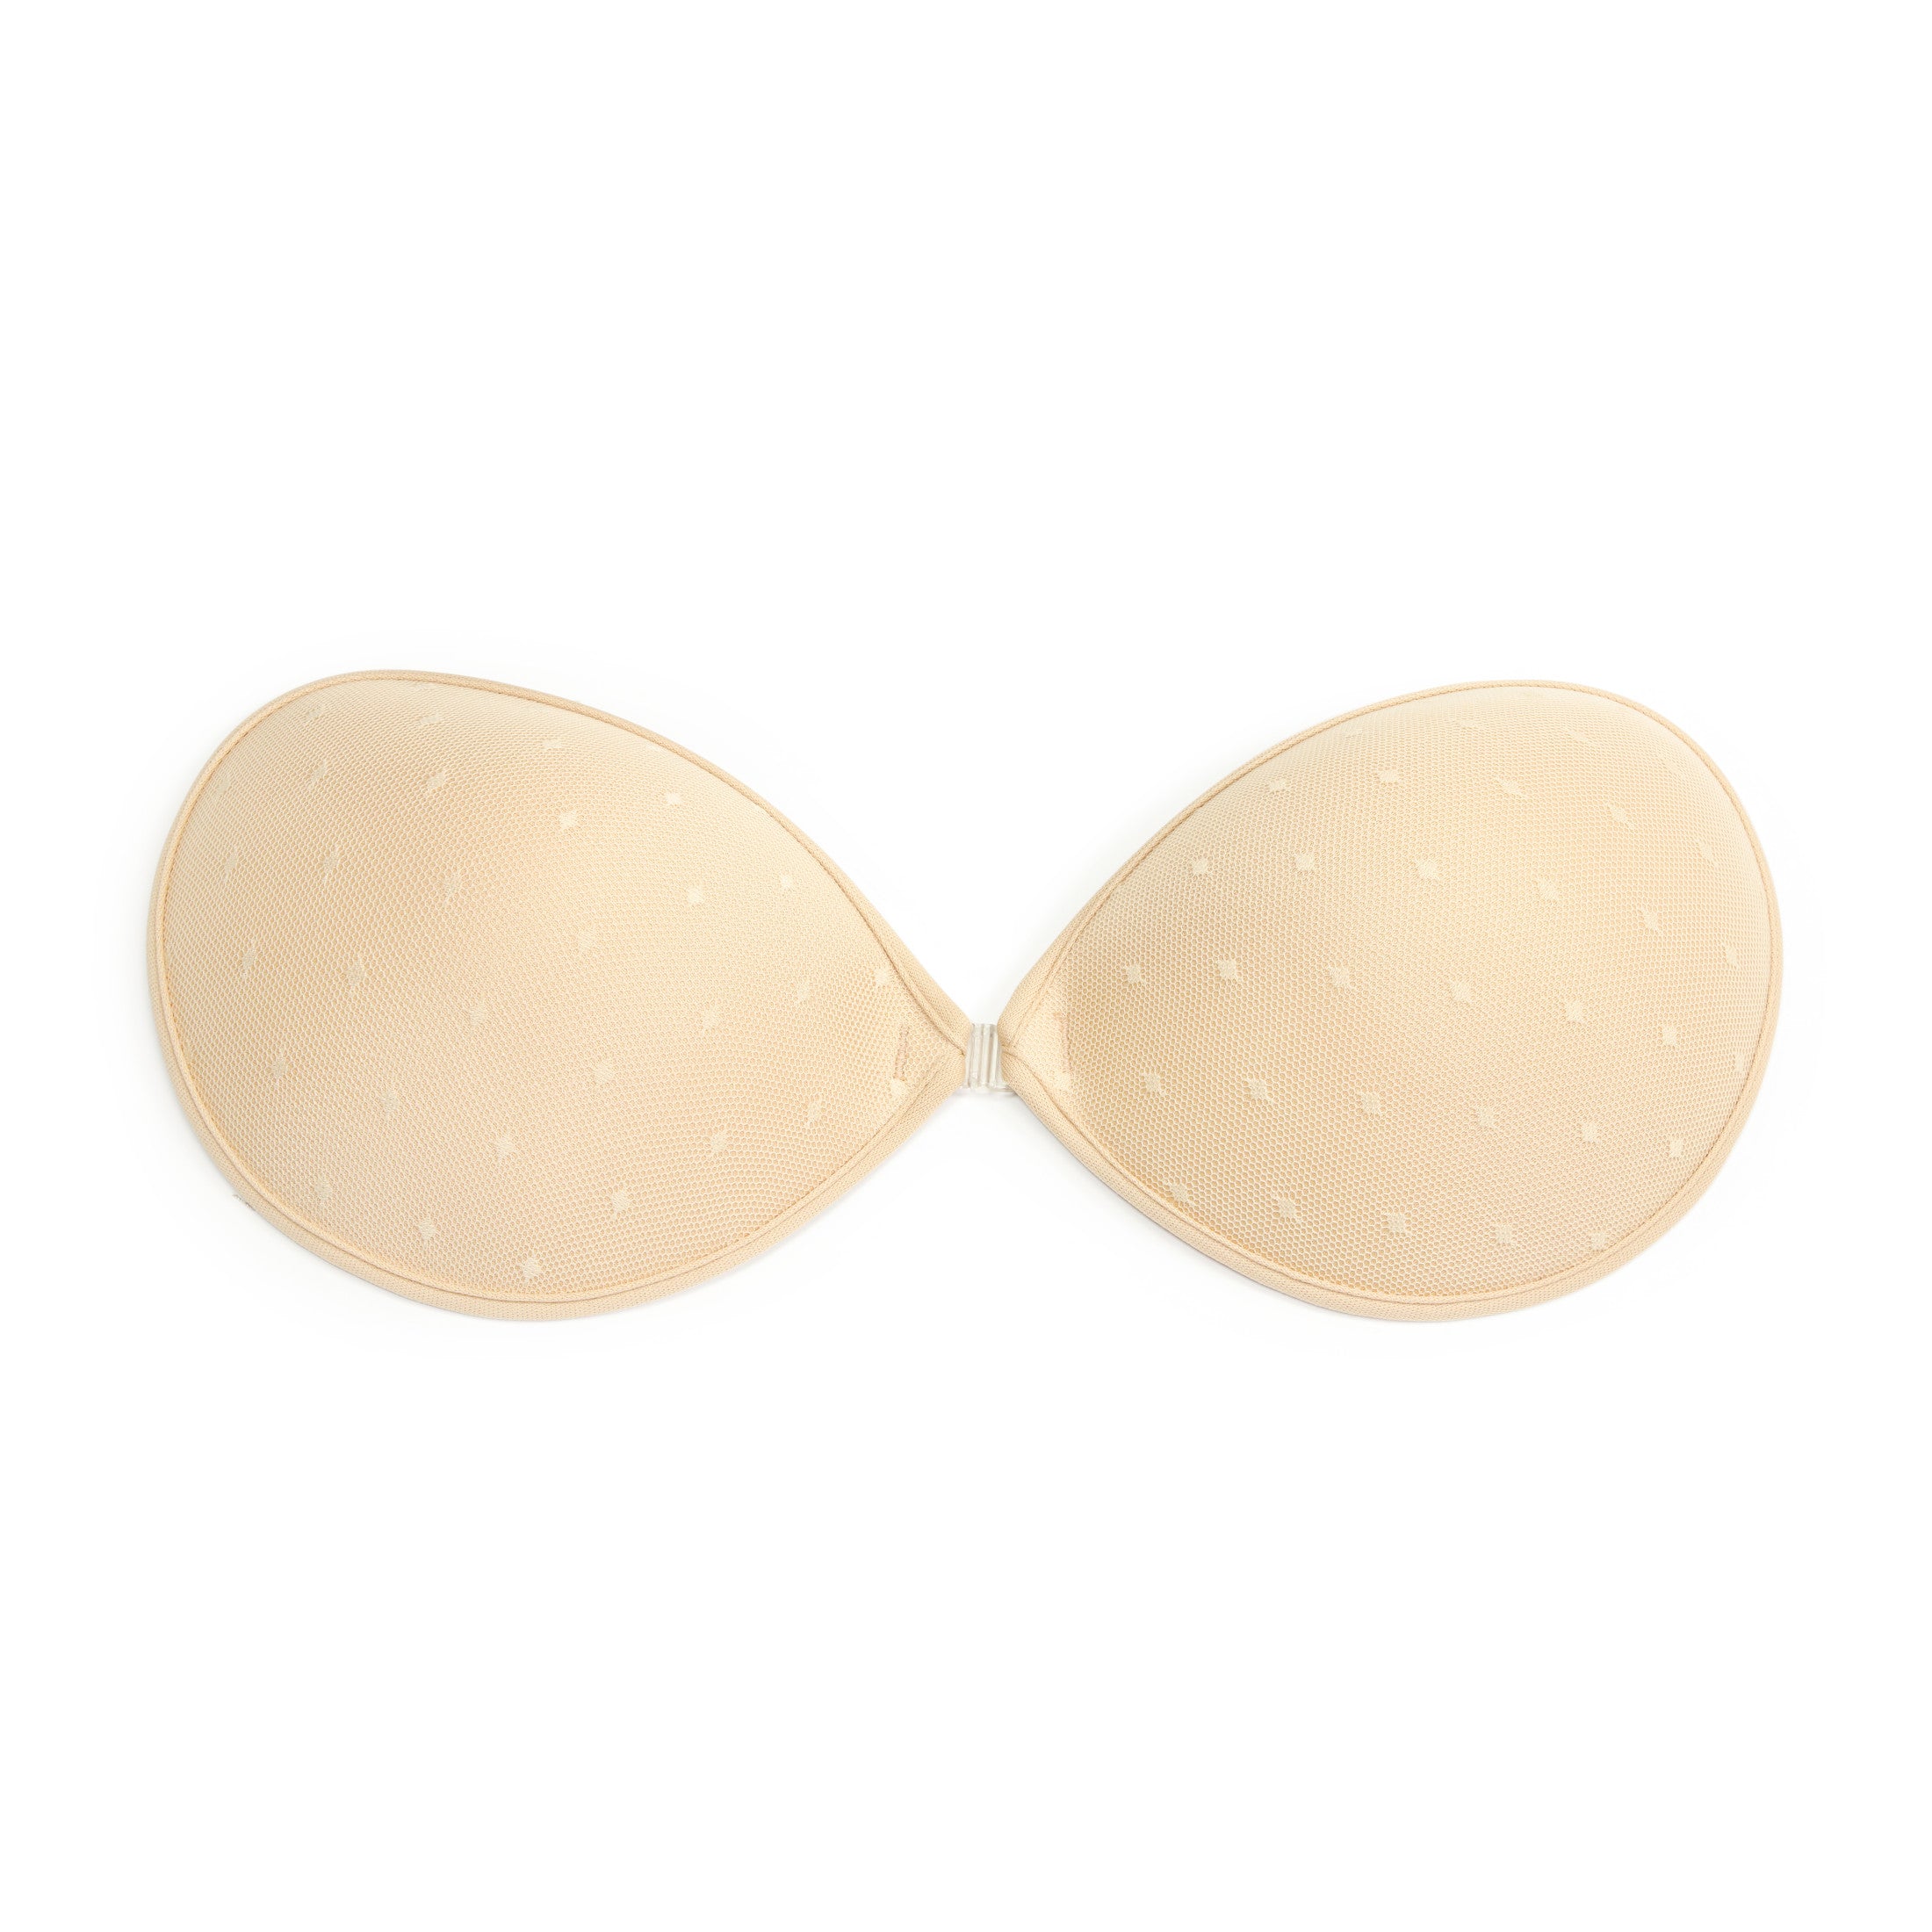 Dritz Molded Gel-Filled Bra Cups, A/B, 1 Pair, Nude